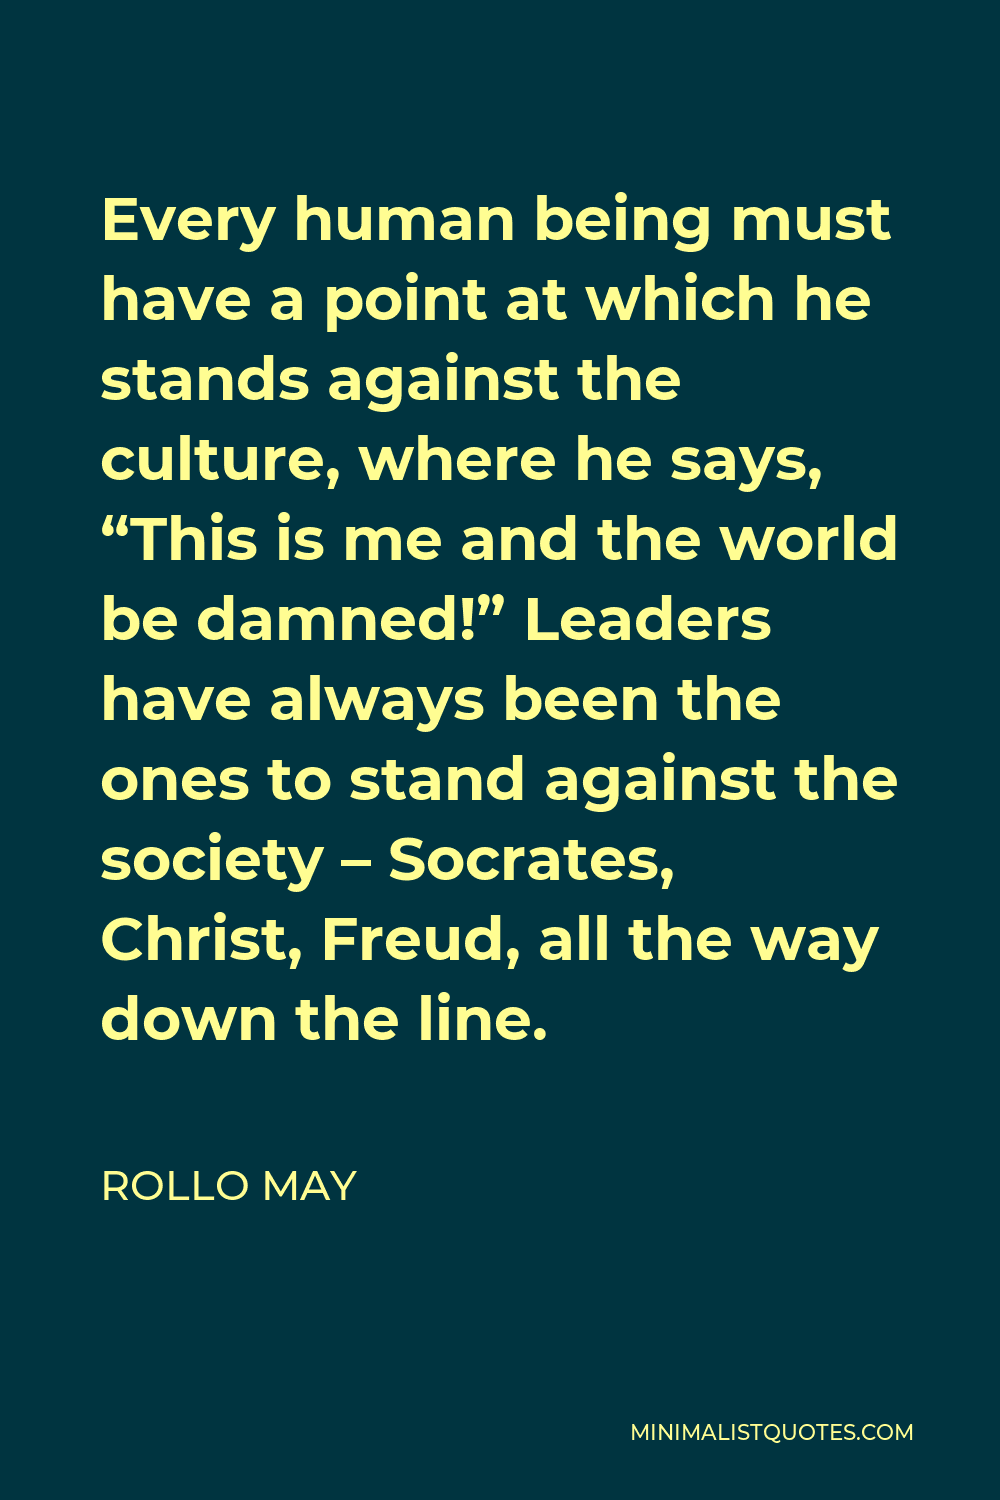 Rollo May Quote - Every human being must have a point at which he stands against the culture, where he says, “This is me and the world be damned!” Leaders have always been the ones to stand against the society – Socrates, Christ, Freud, all the way down the line.